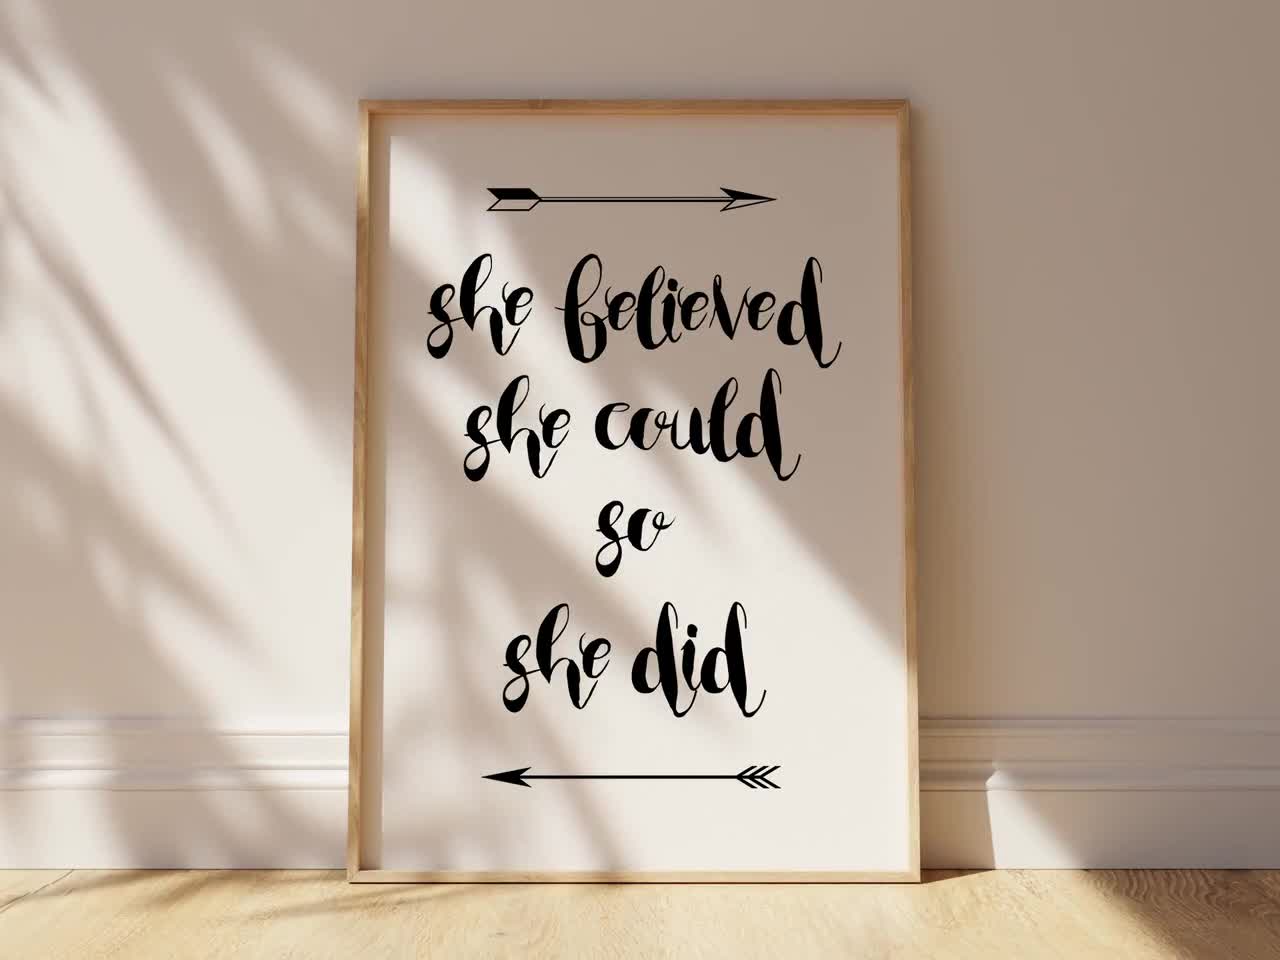 Teen Girl Room Did It Believed Quotes, Decor, - She Art Could Feminist Gift, Girls Wall Etsy She so Poster, Pictures, Quote Monochrome She Picture